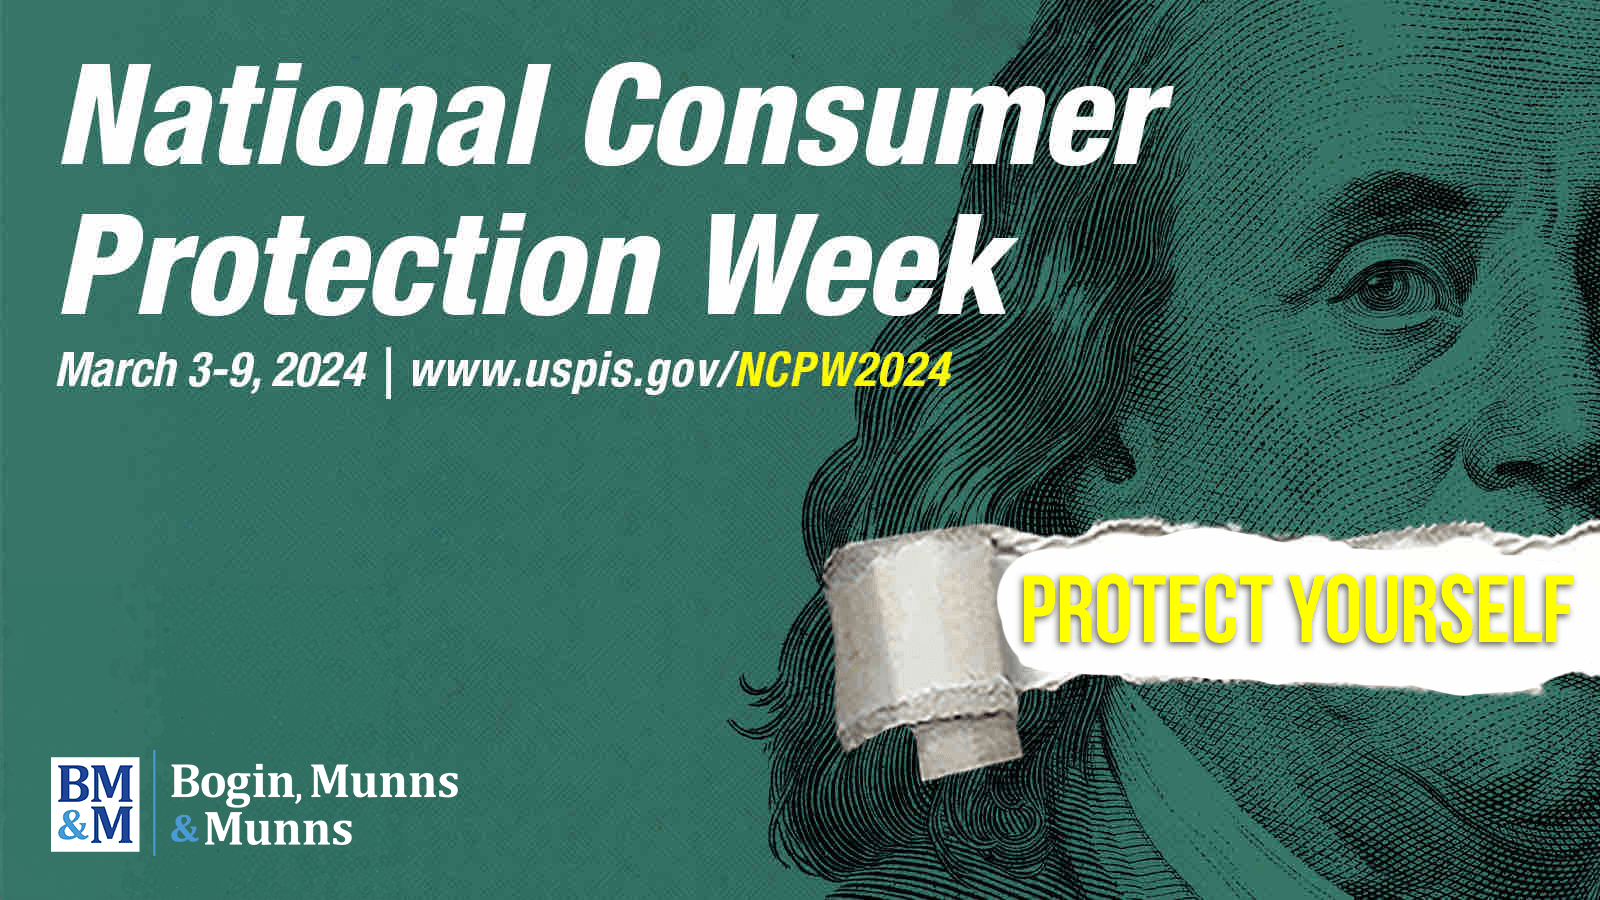 Join Bogin, Munns & Munns in Observing National Consumer Protection Week